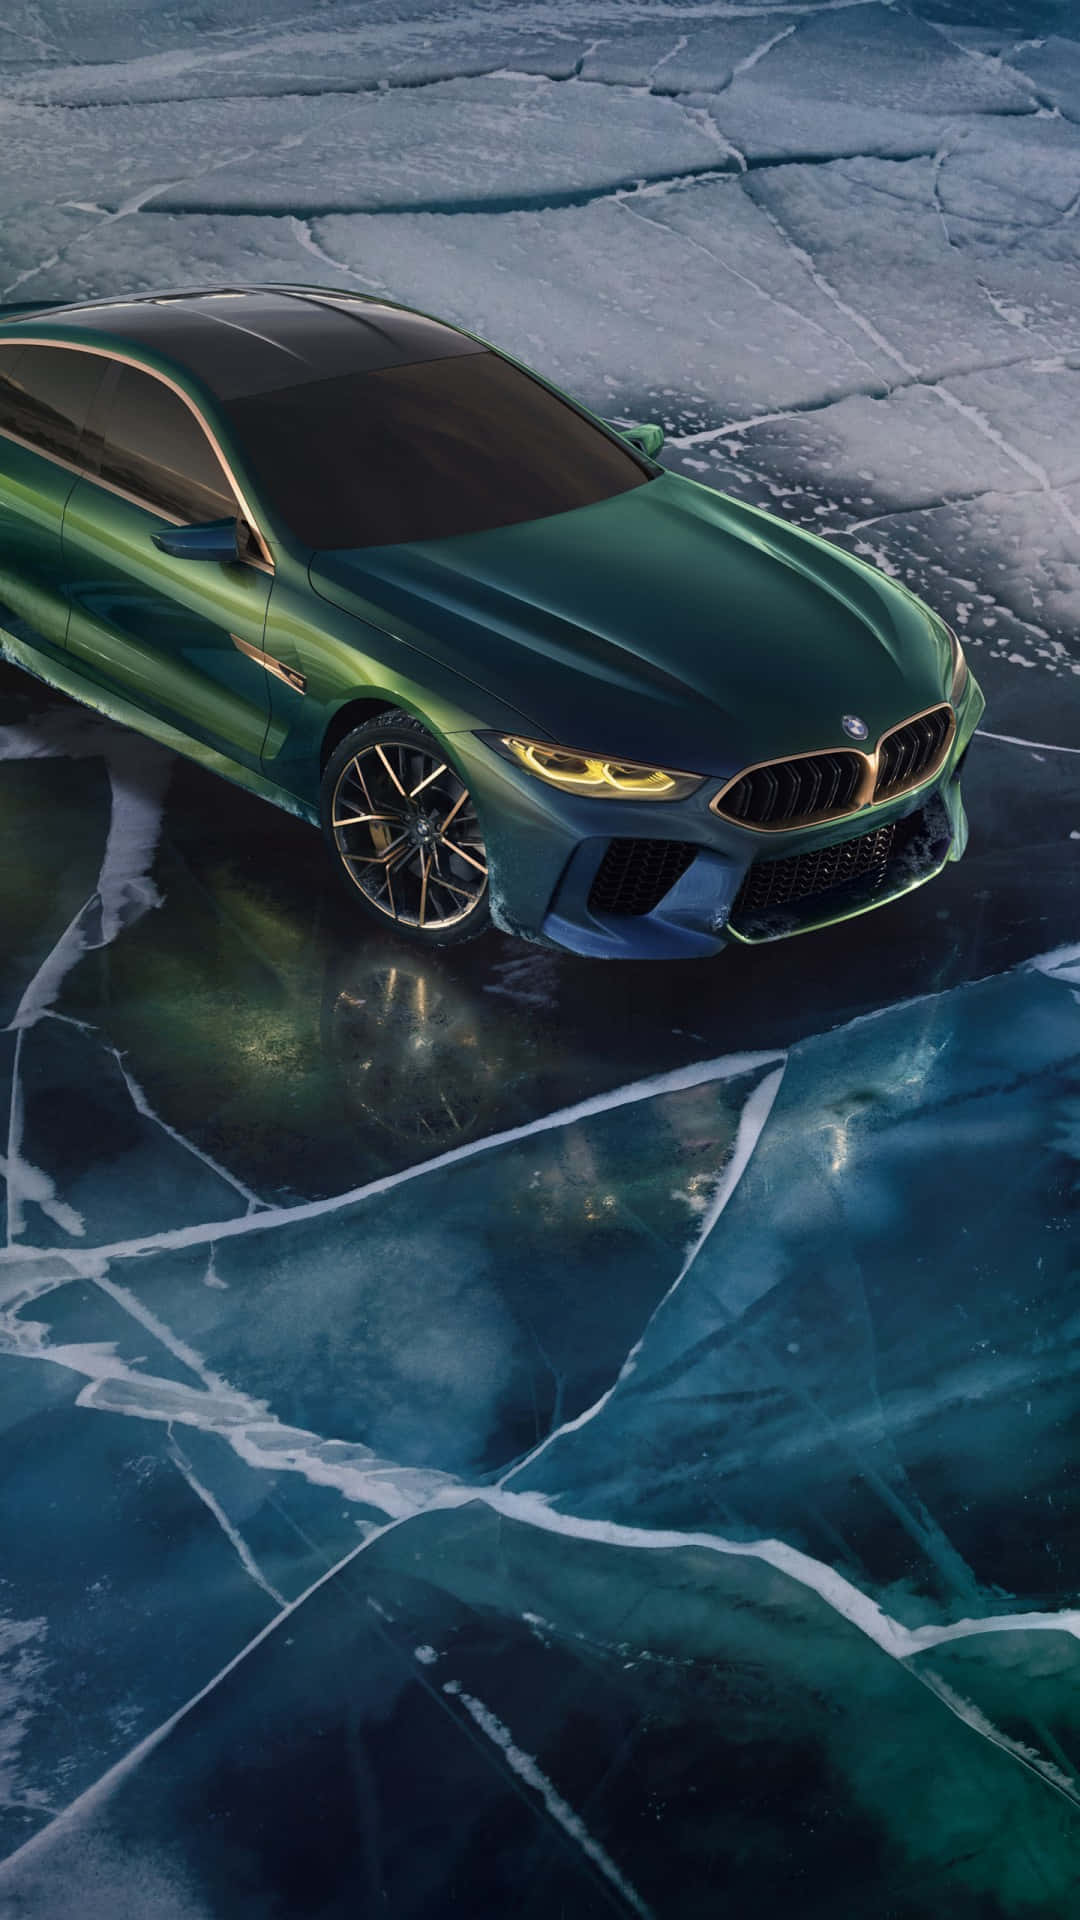 Experience Luxury in the Powerful BMW M8 Wallpaper